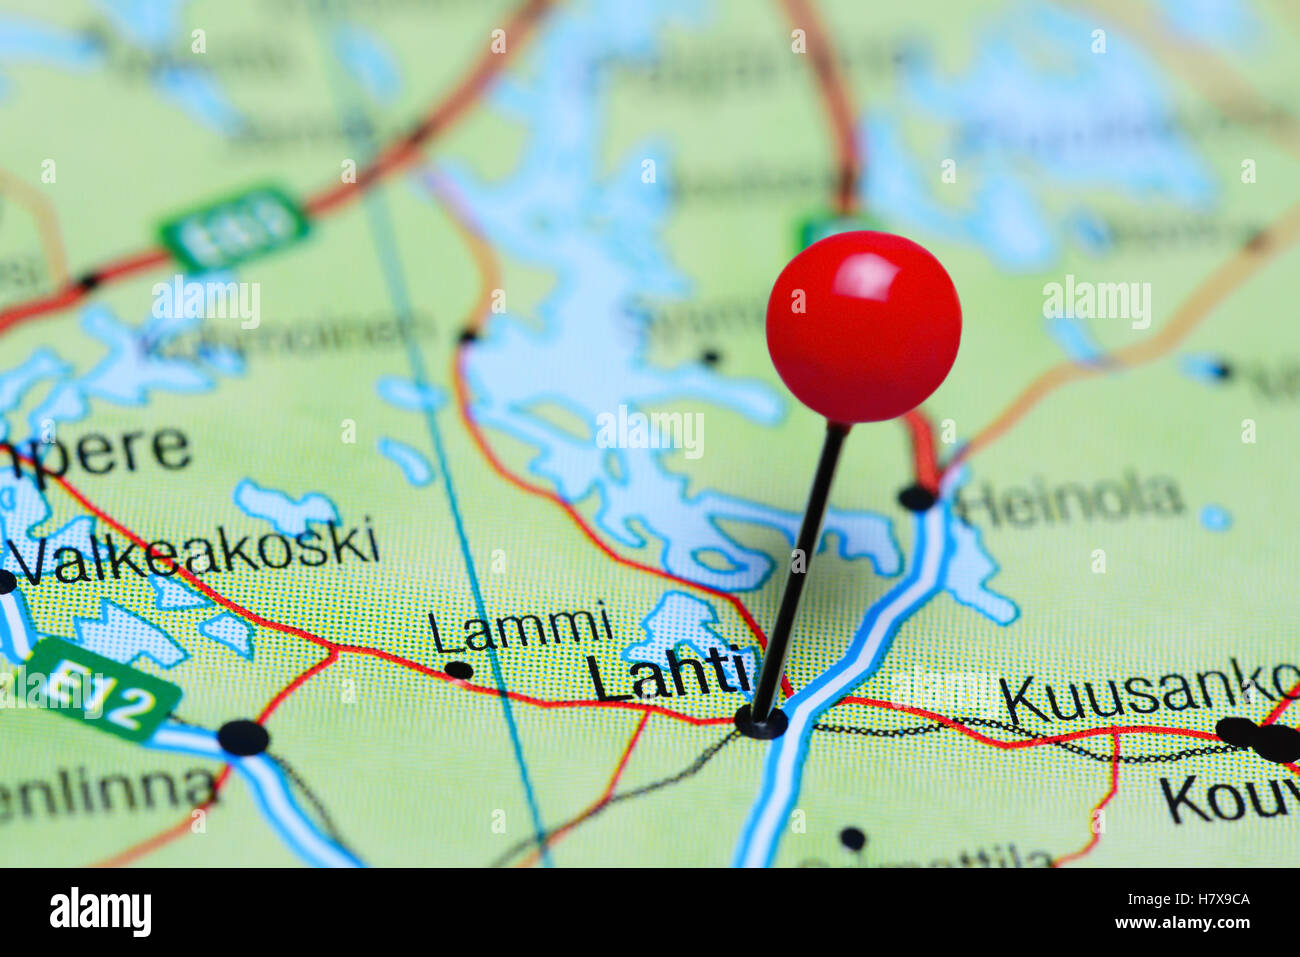 Lahti pinned on a map of Finland Stock Photo